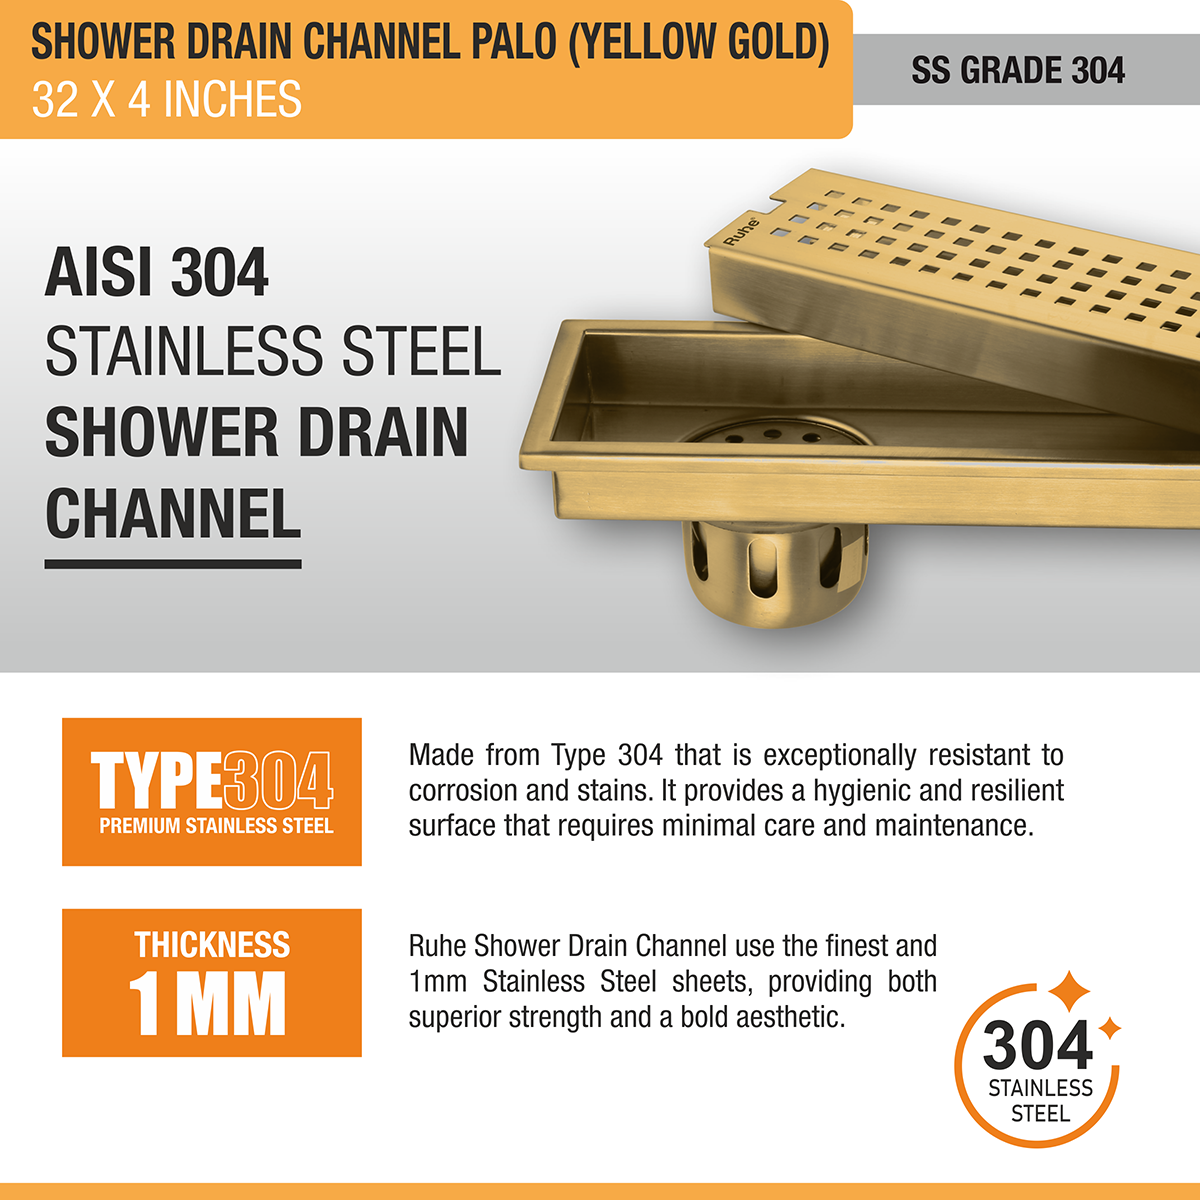 Palo Shower Drain Channel (32 x 4 Inches) YELLOW GOLD stainless steel